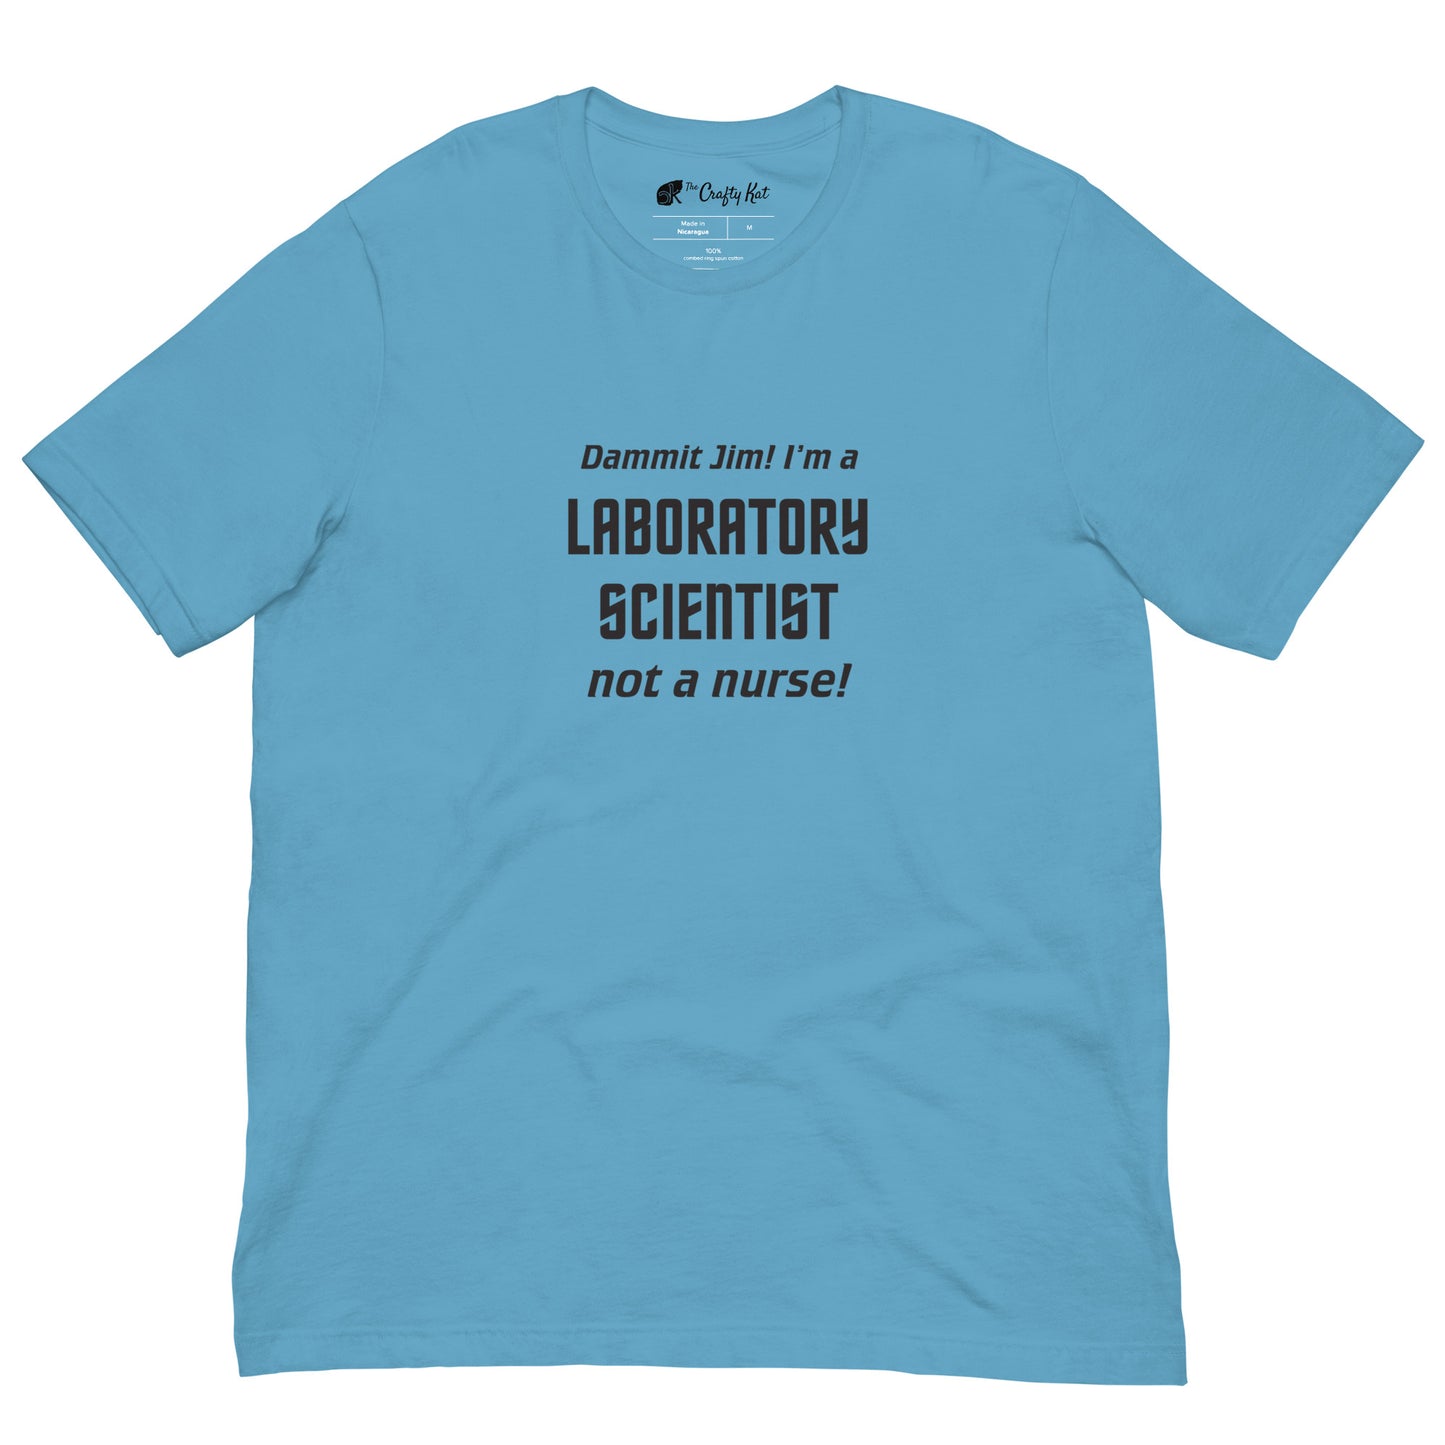 Ocean Blue t-shirt with text graphic in Star Trek font: "Dammit Jim! I'm a LABORATORY SCIENTIST not a nurse!"